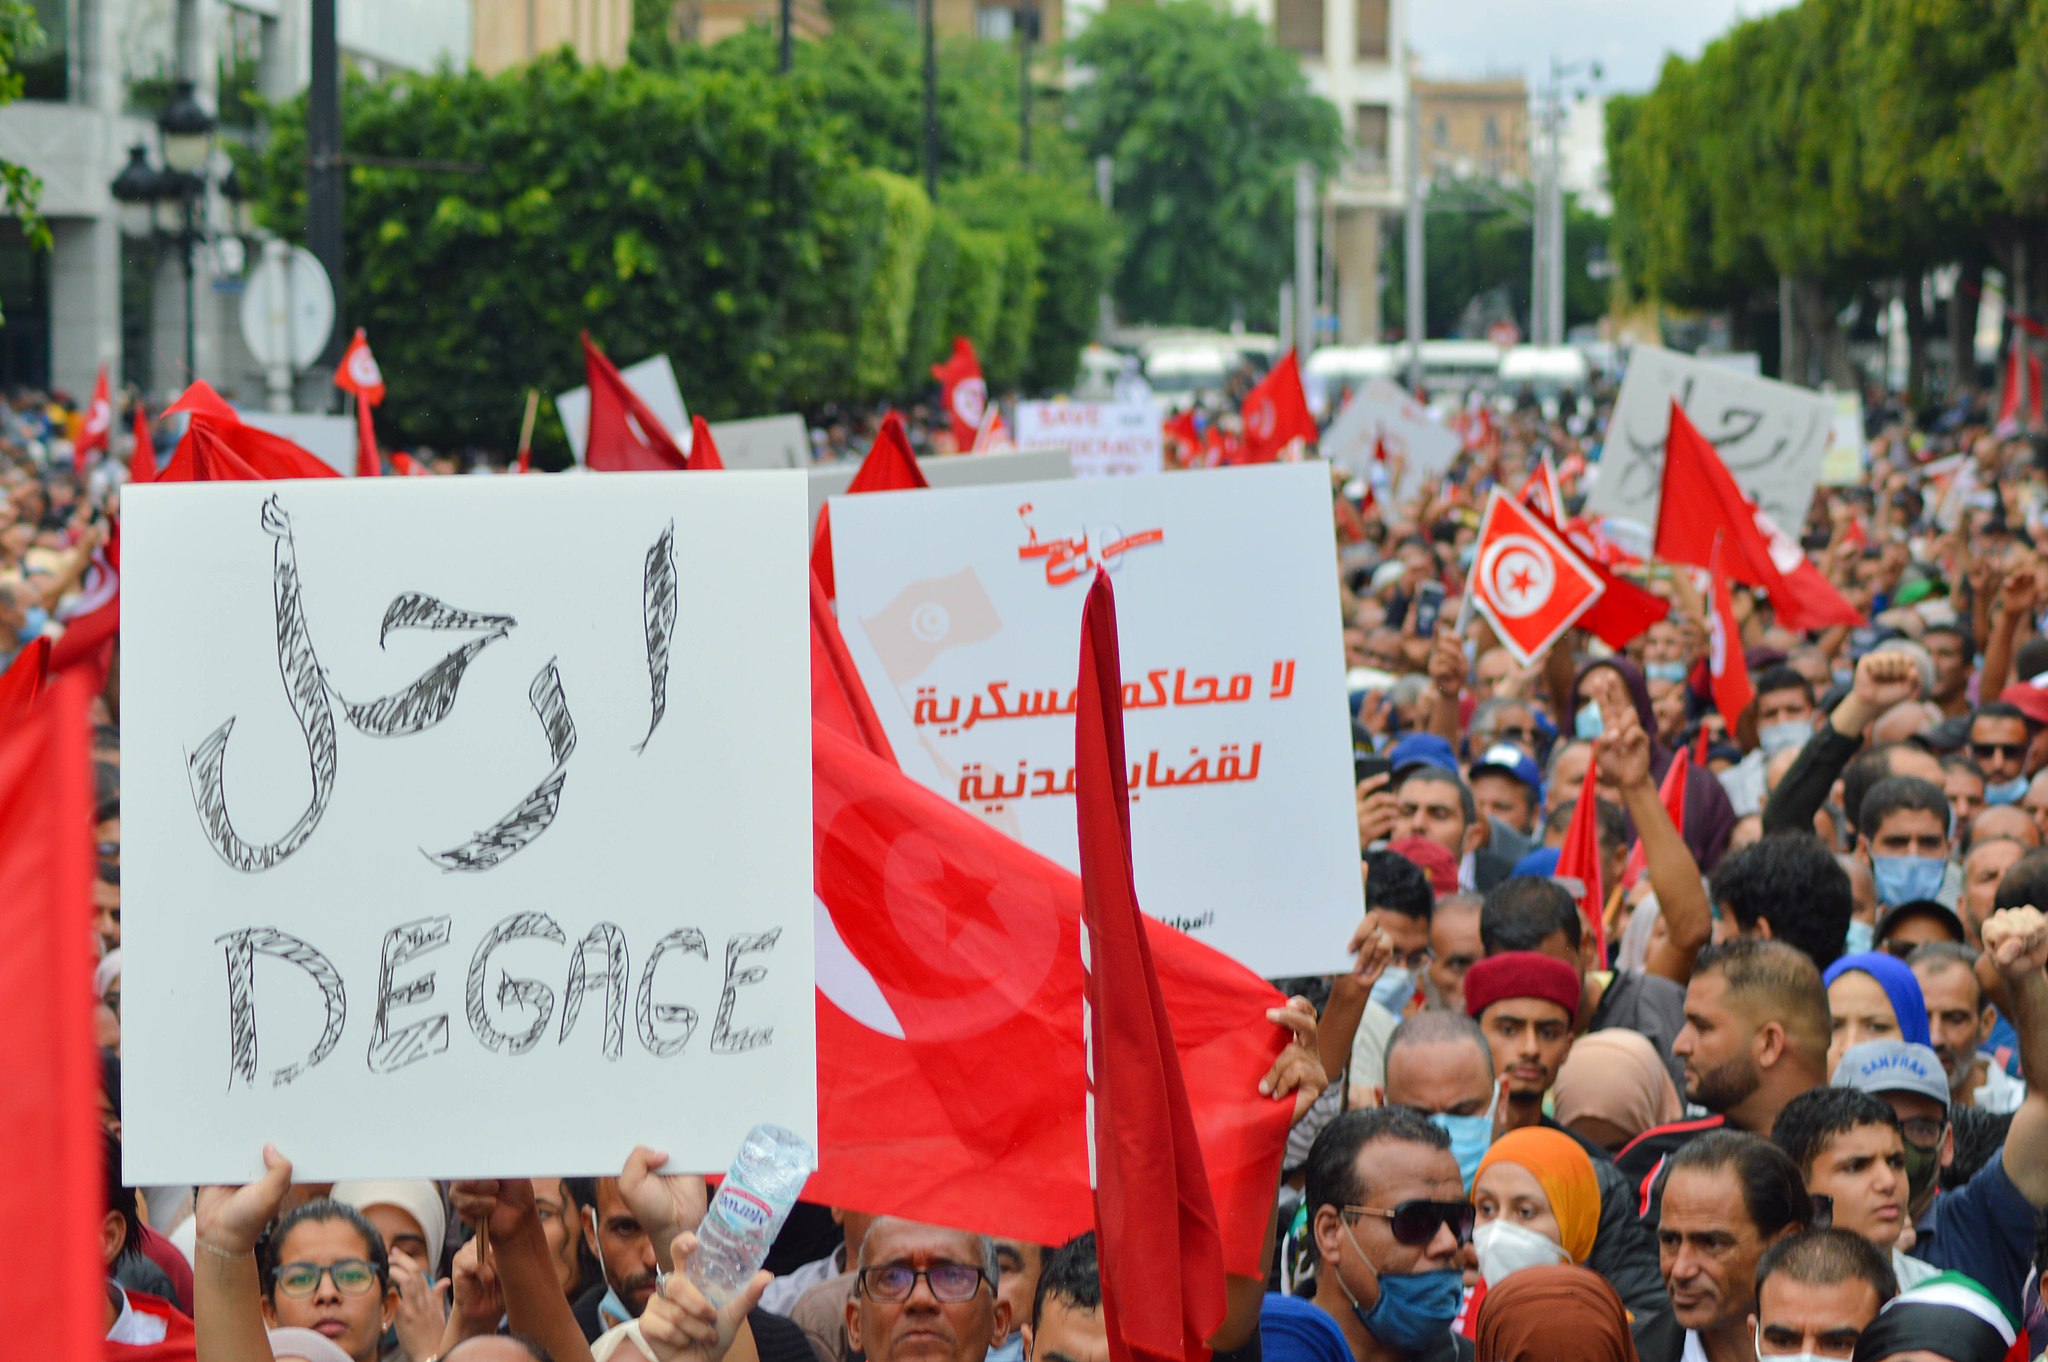 Tunisian protestors in 2021 protesting at a main square, as a group, while waving Tunisian flags